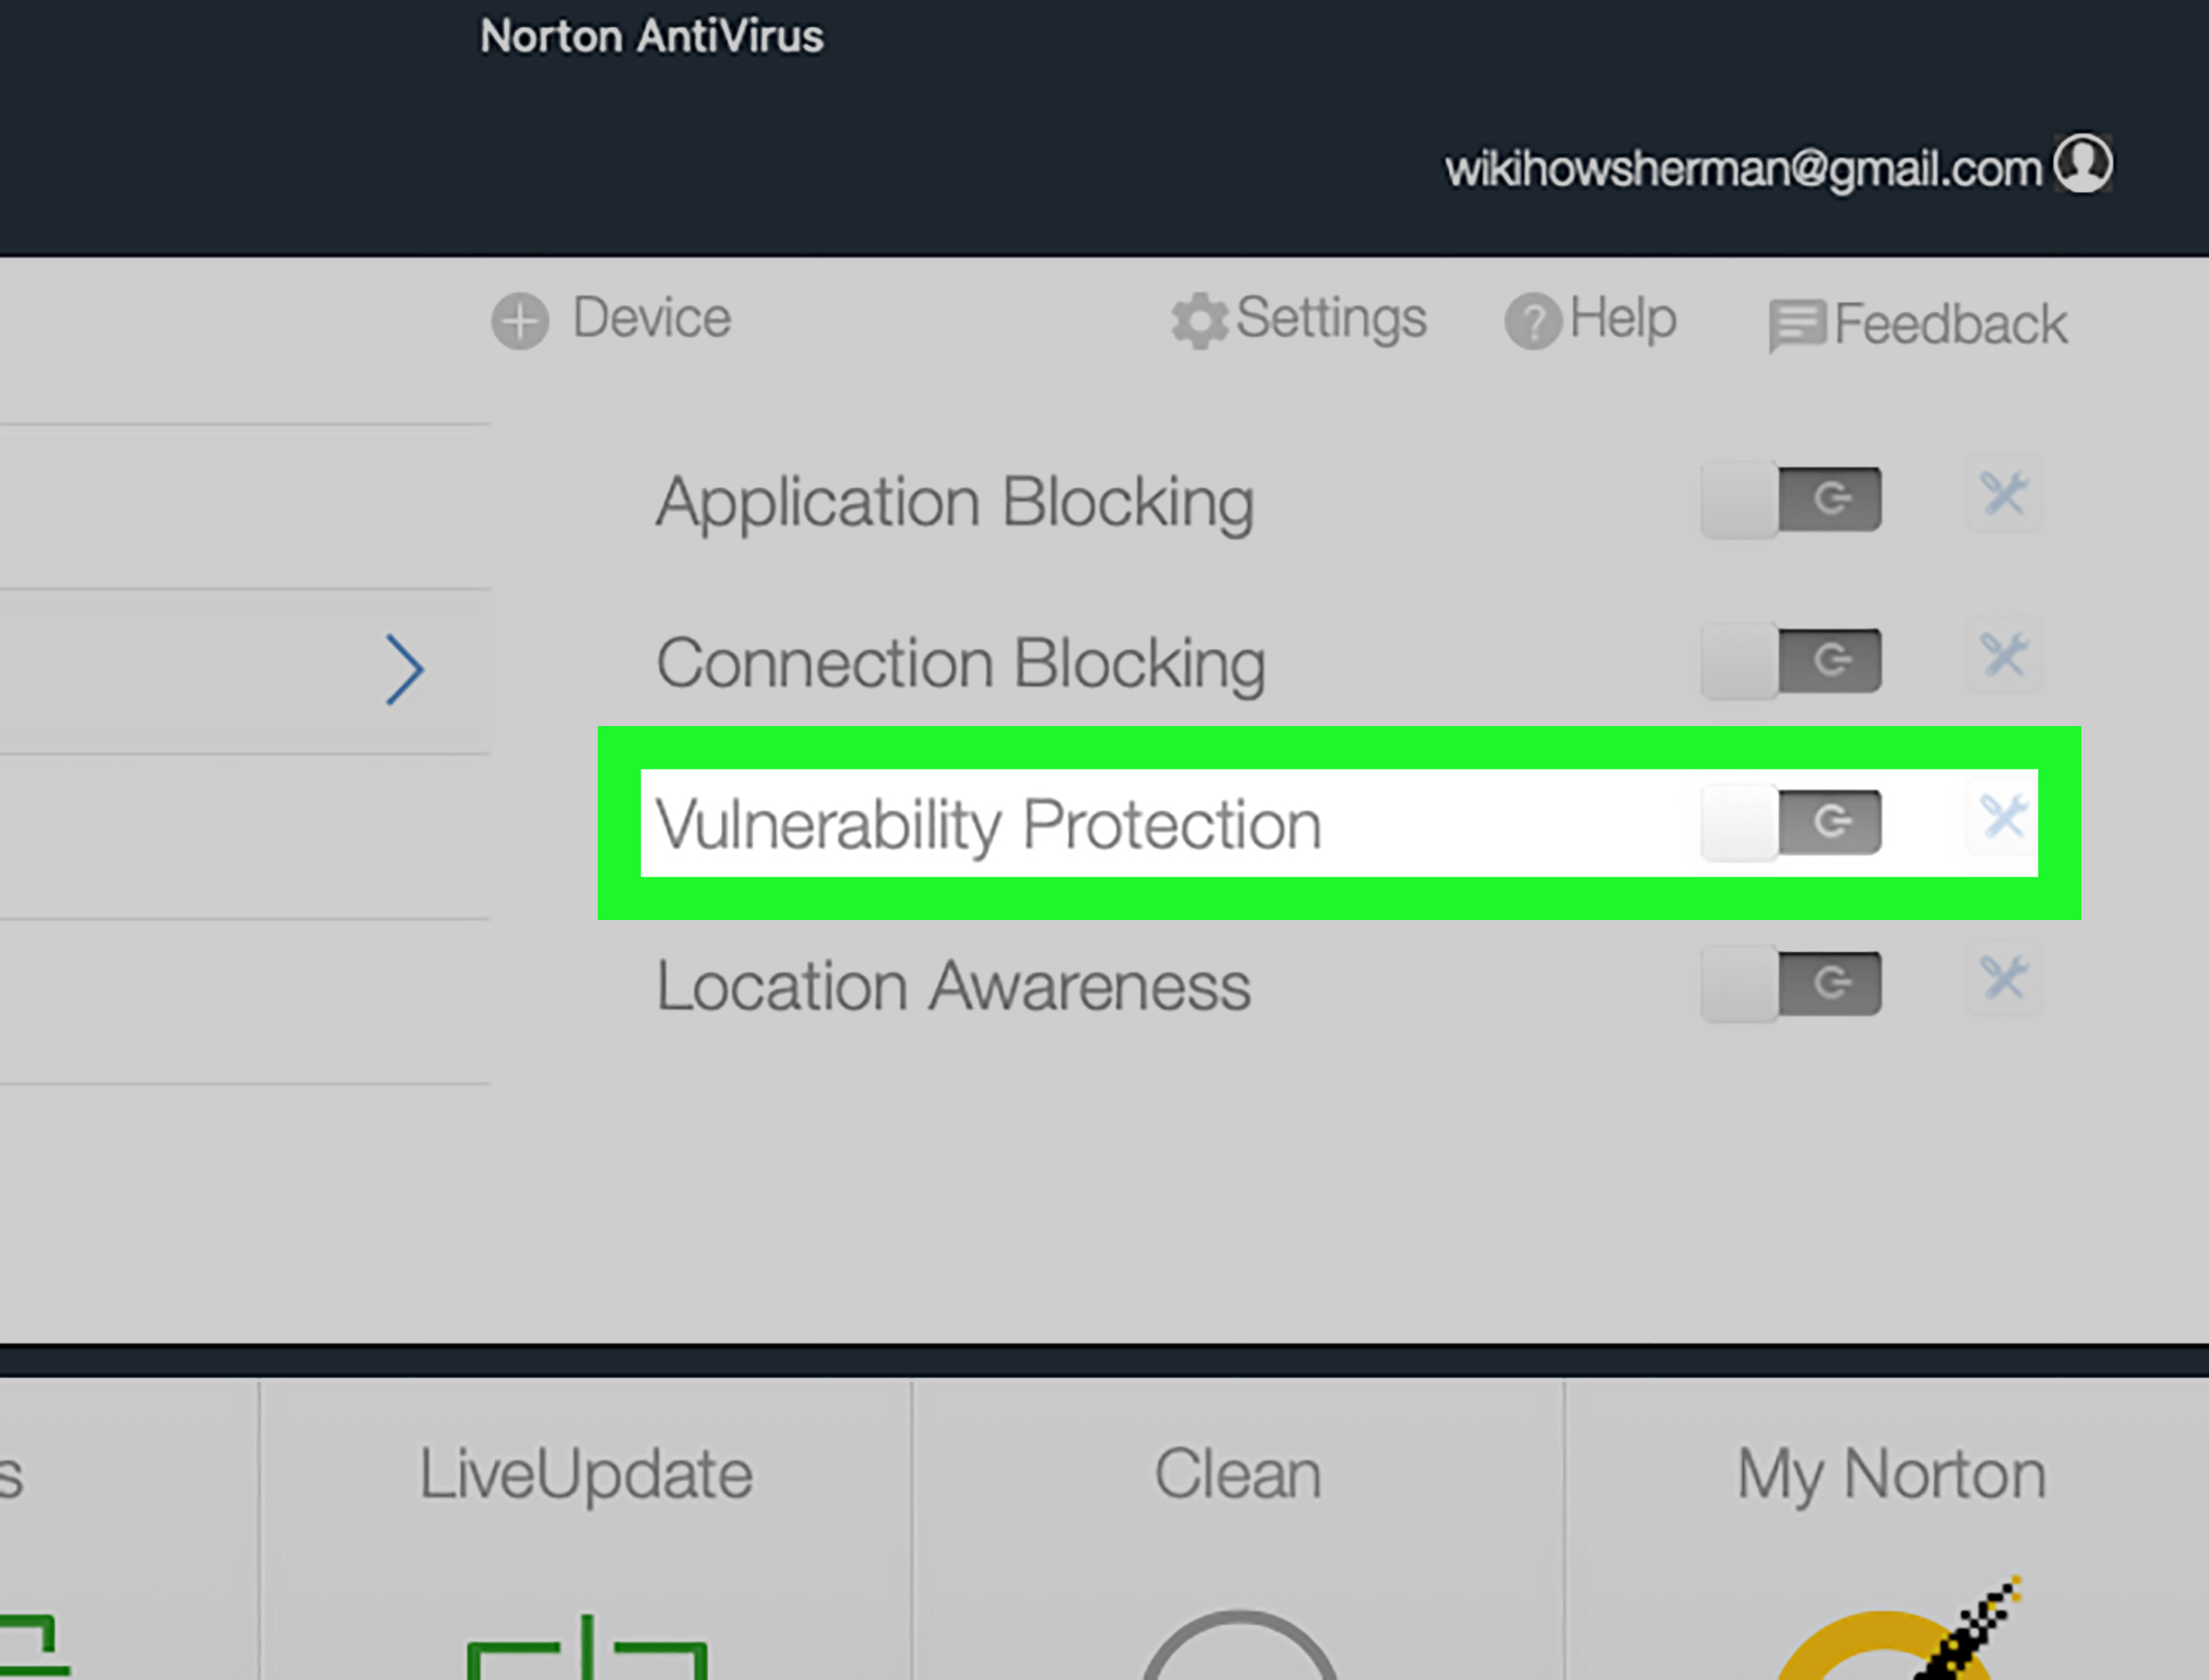 Open your antivirus or firewall software.
Find the option to temporarily disable or turn off protection.